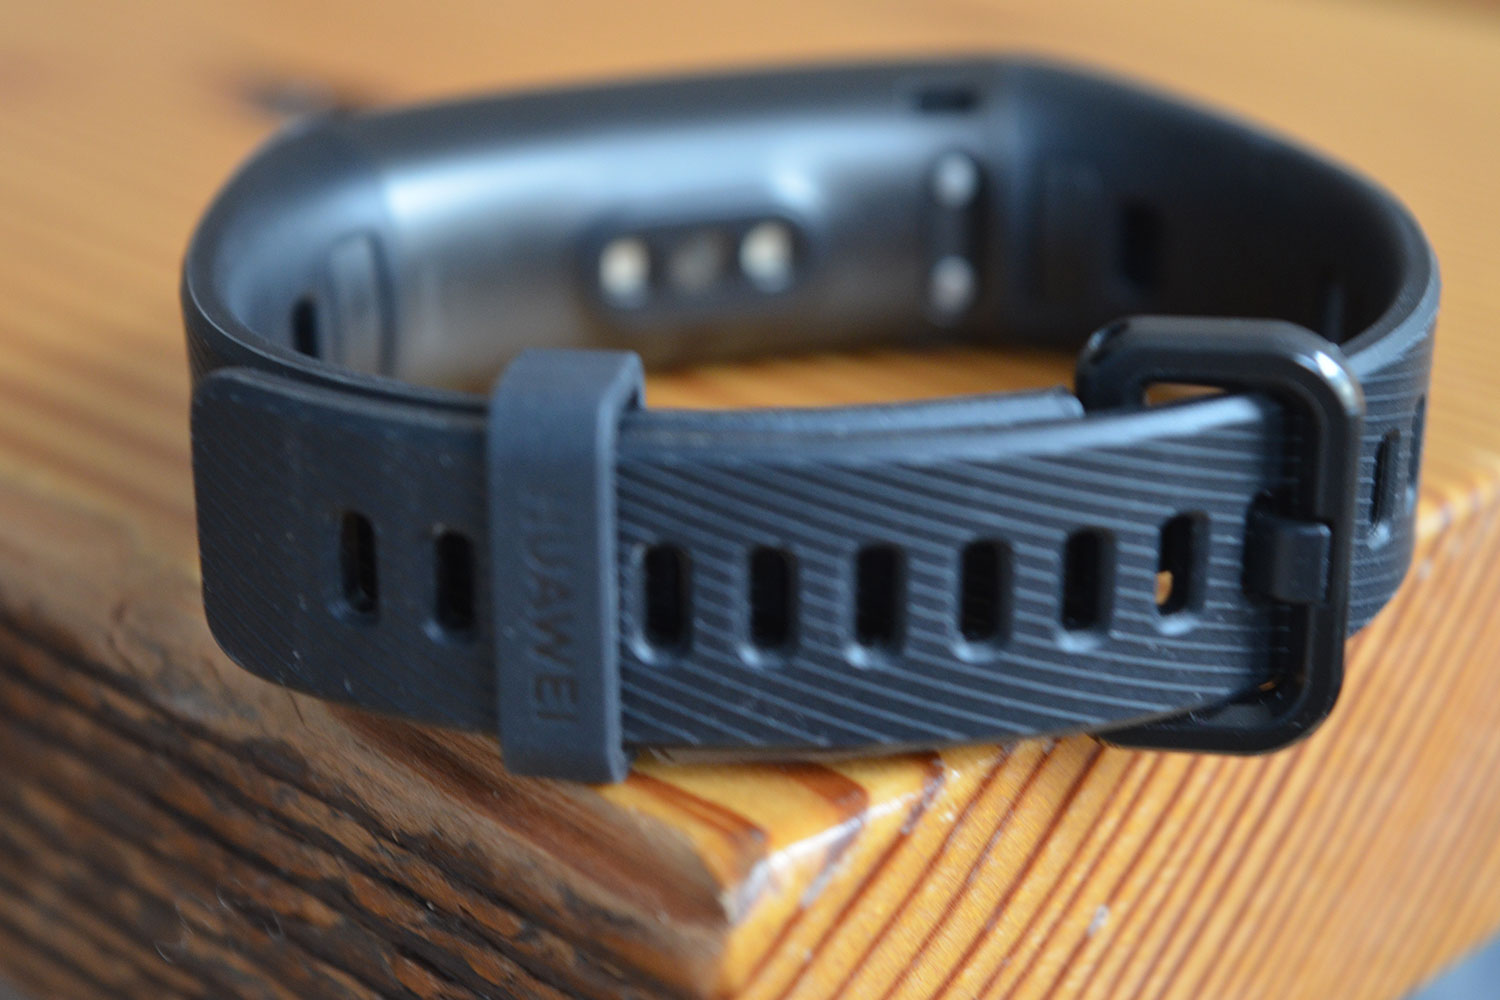 revision huawei band 3 pro review 16